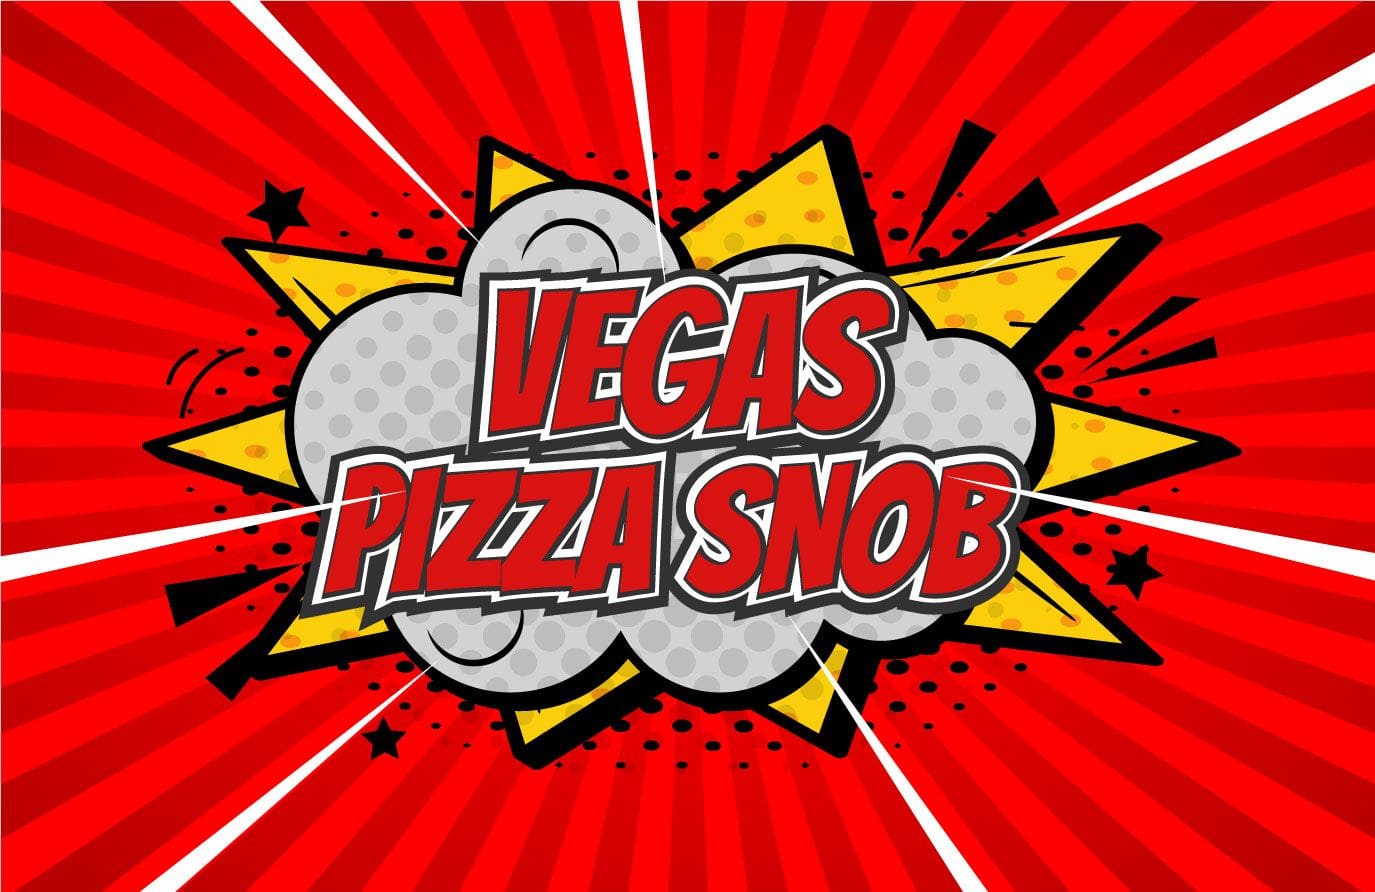 A red and yellow comic book background with the words vegas pizza snob.